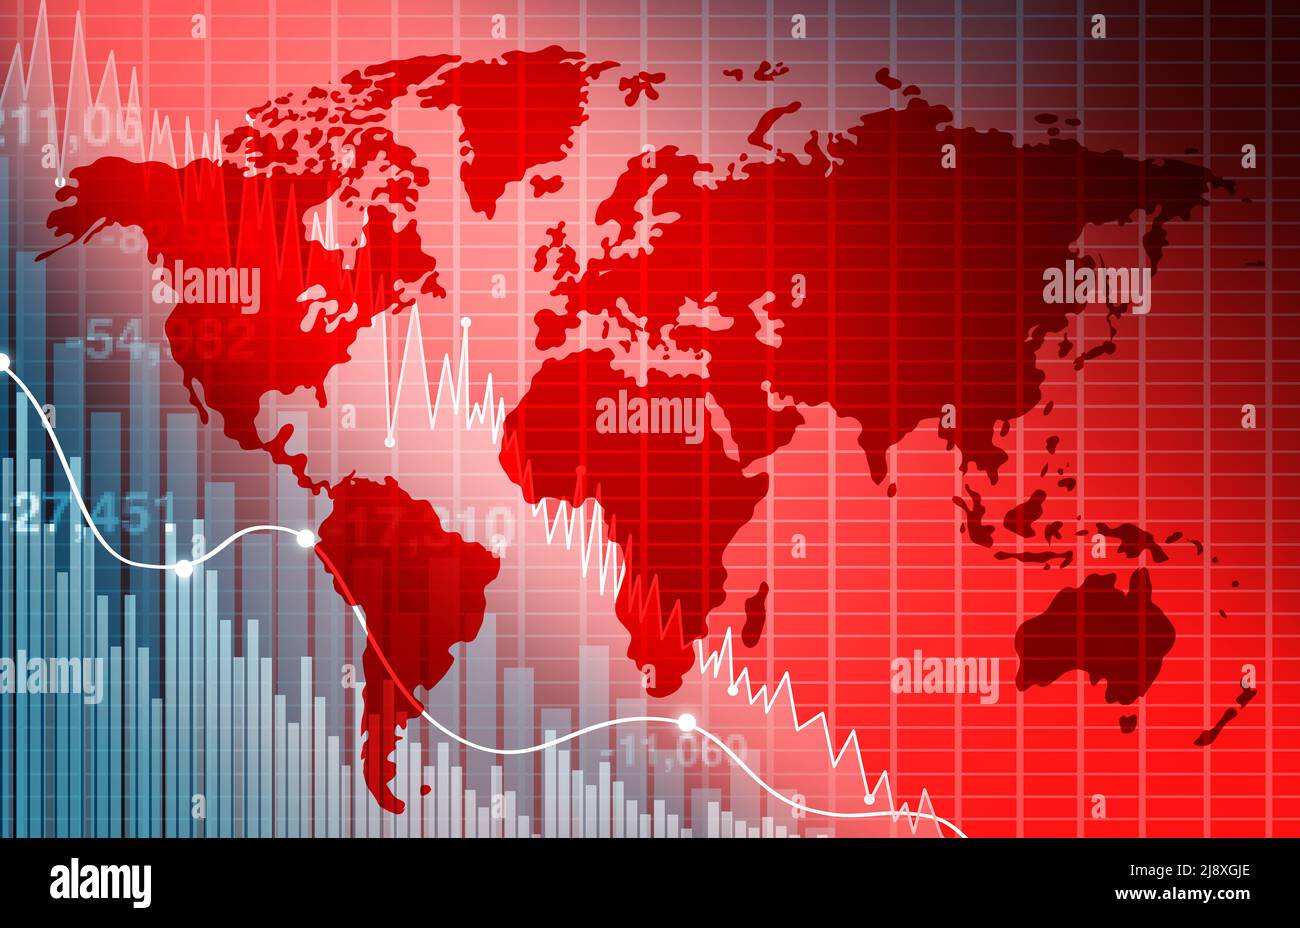 Declining World economy and business decline or economic fall and world business crisis with an international economy falling with a downward trend. Stock Photo